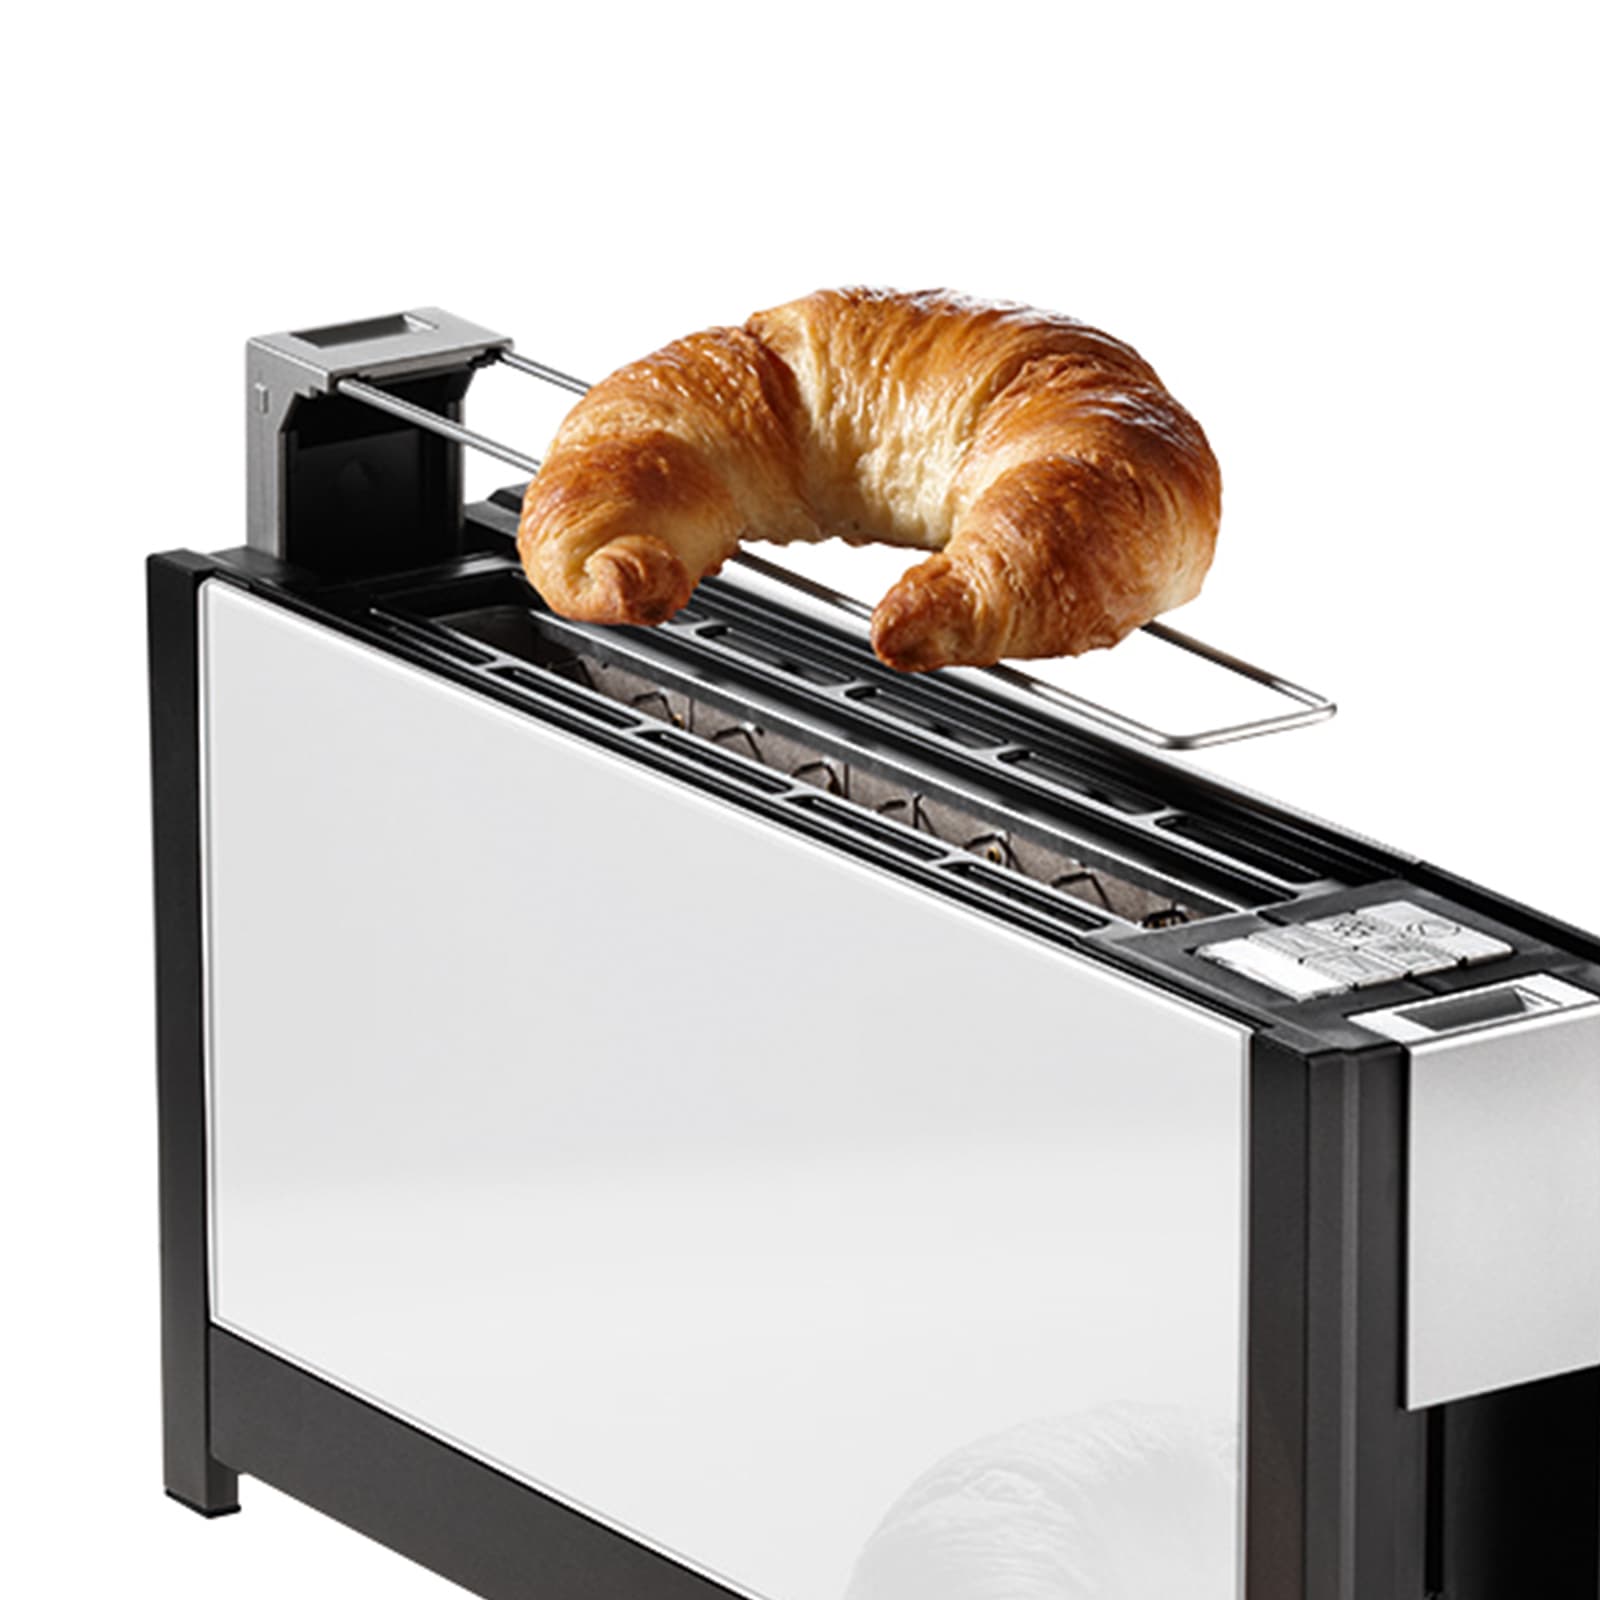 Toaster - Slim long-slot toaster with glass or aluminium front